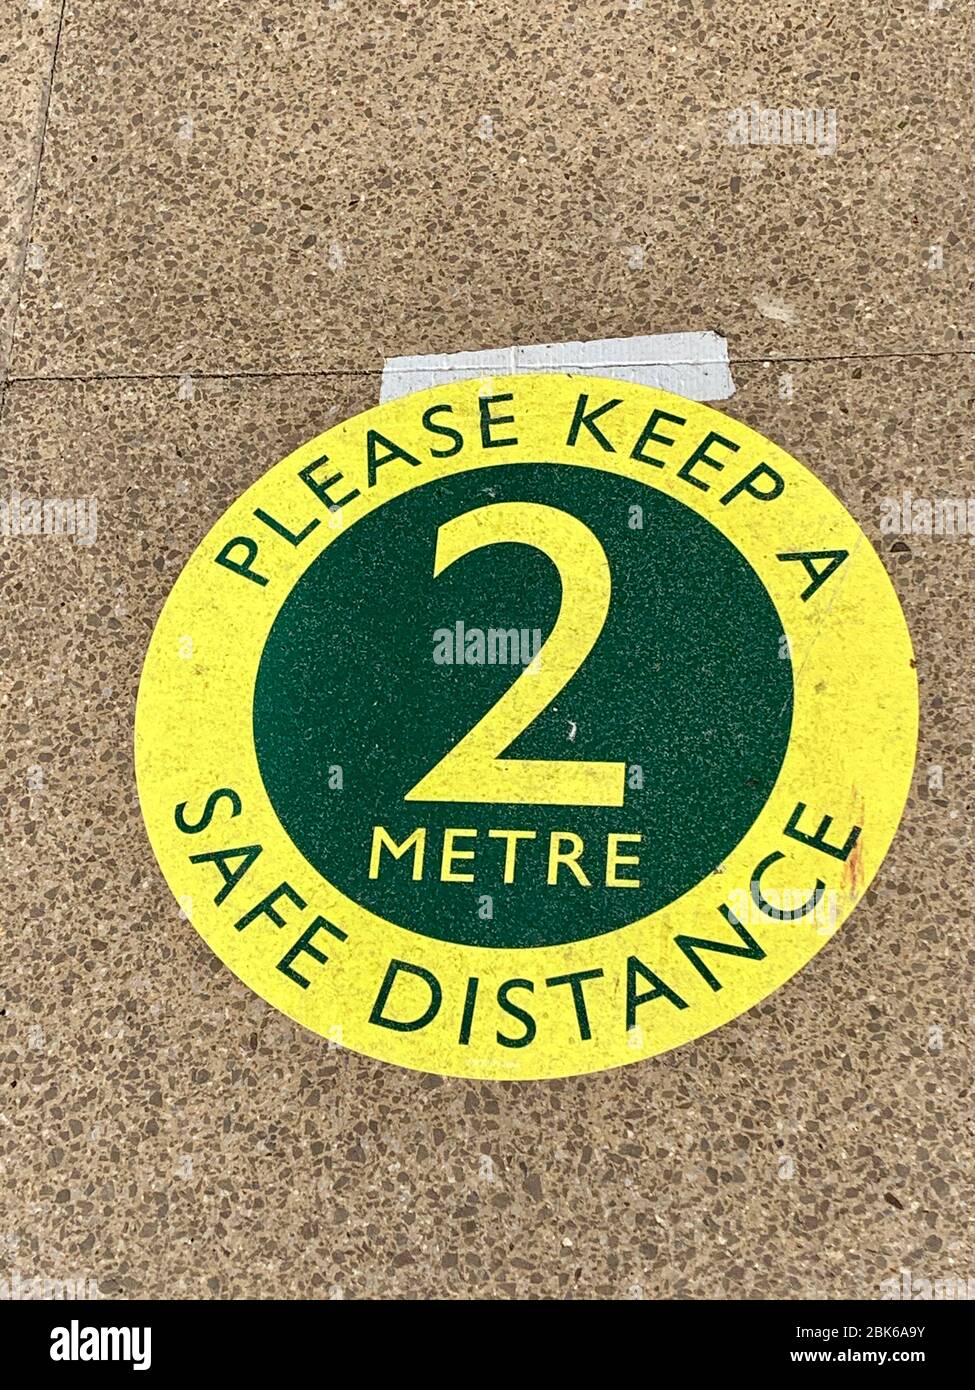 Please Keep a Safe Distance - 2 Metre - sign on floor outside Waitrose Supermarket in response to covid-19 coronavirus pandemic Stock Photo